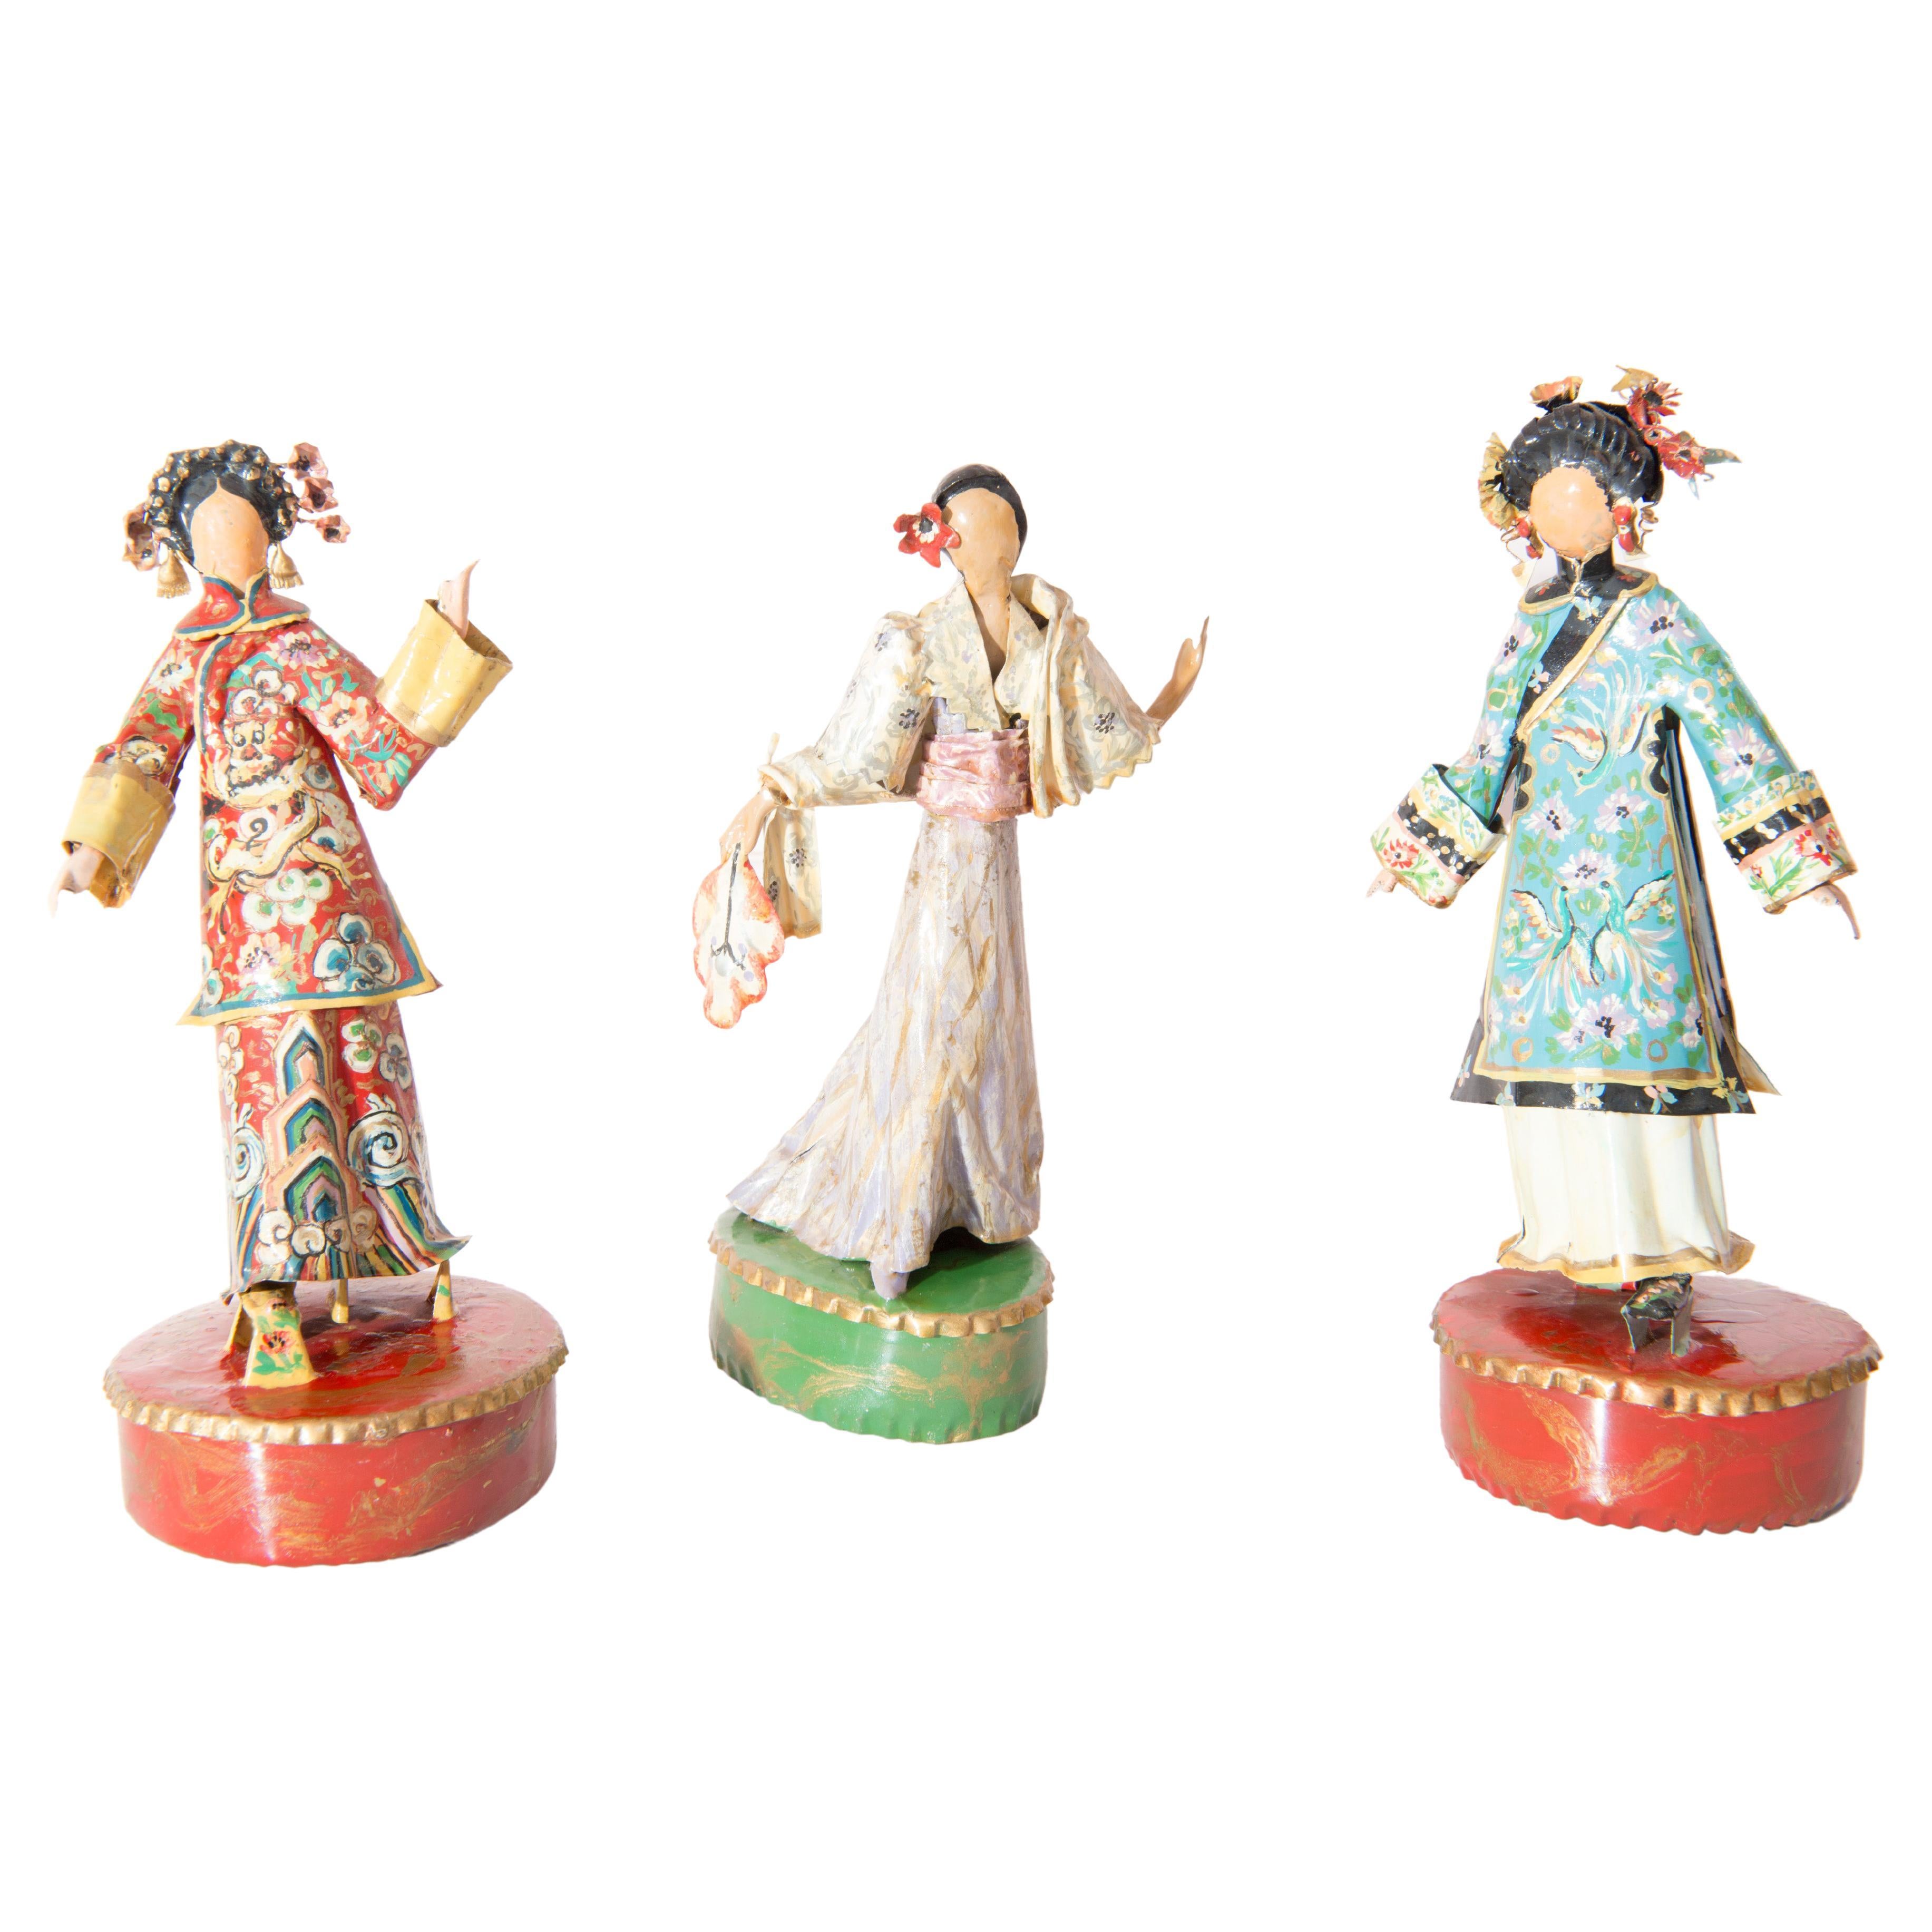 Trio of Asian Costumed Women Sculptures by Lee Menichetti For Sale